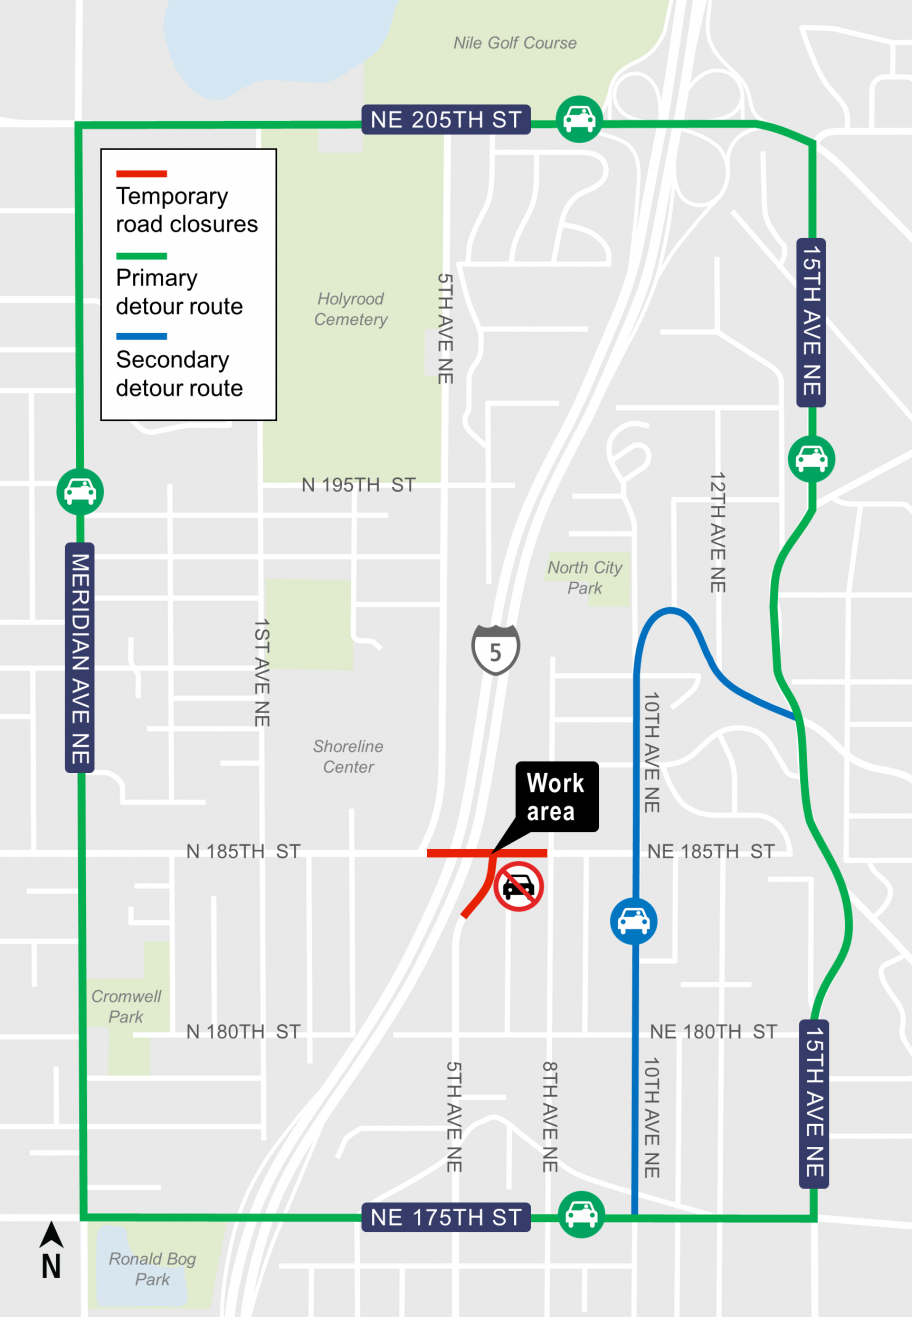 North 185th St Night work construction map 